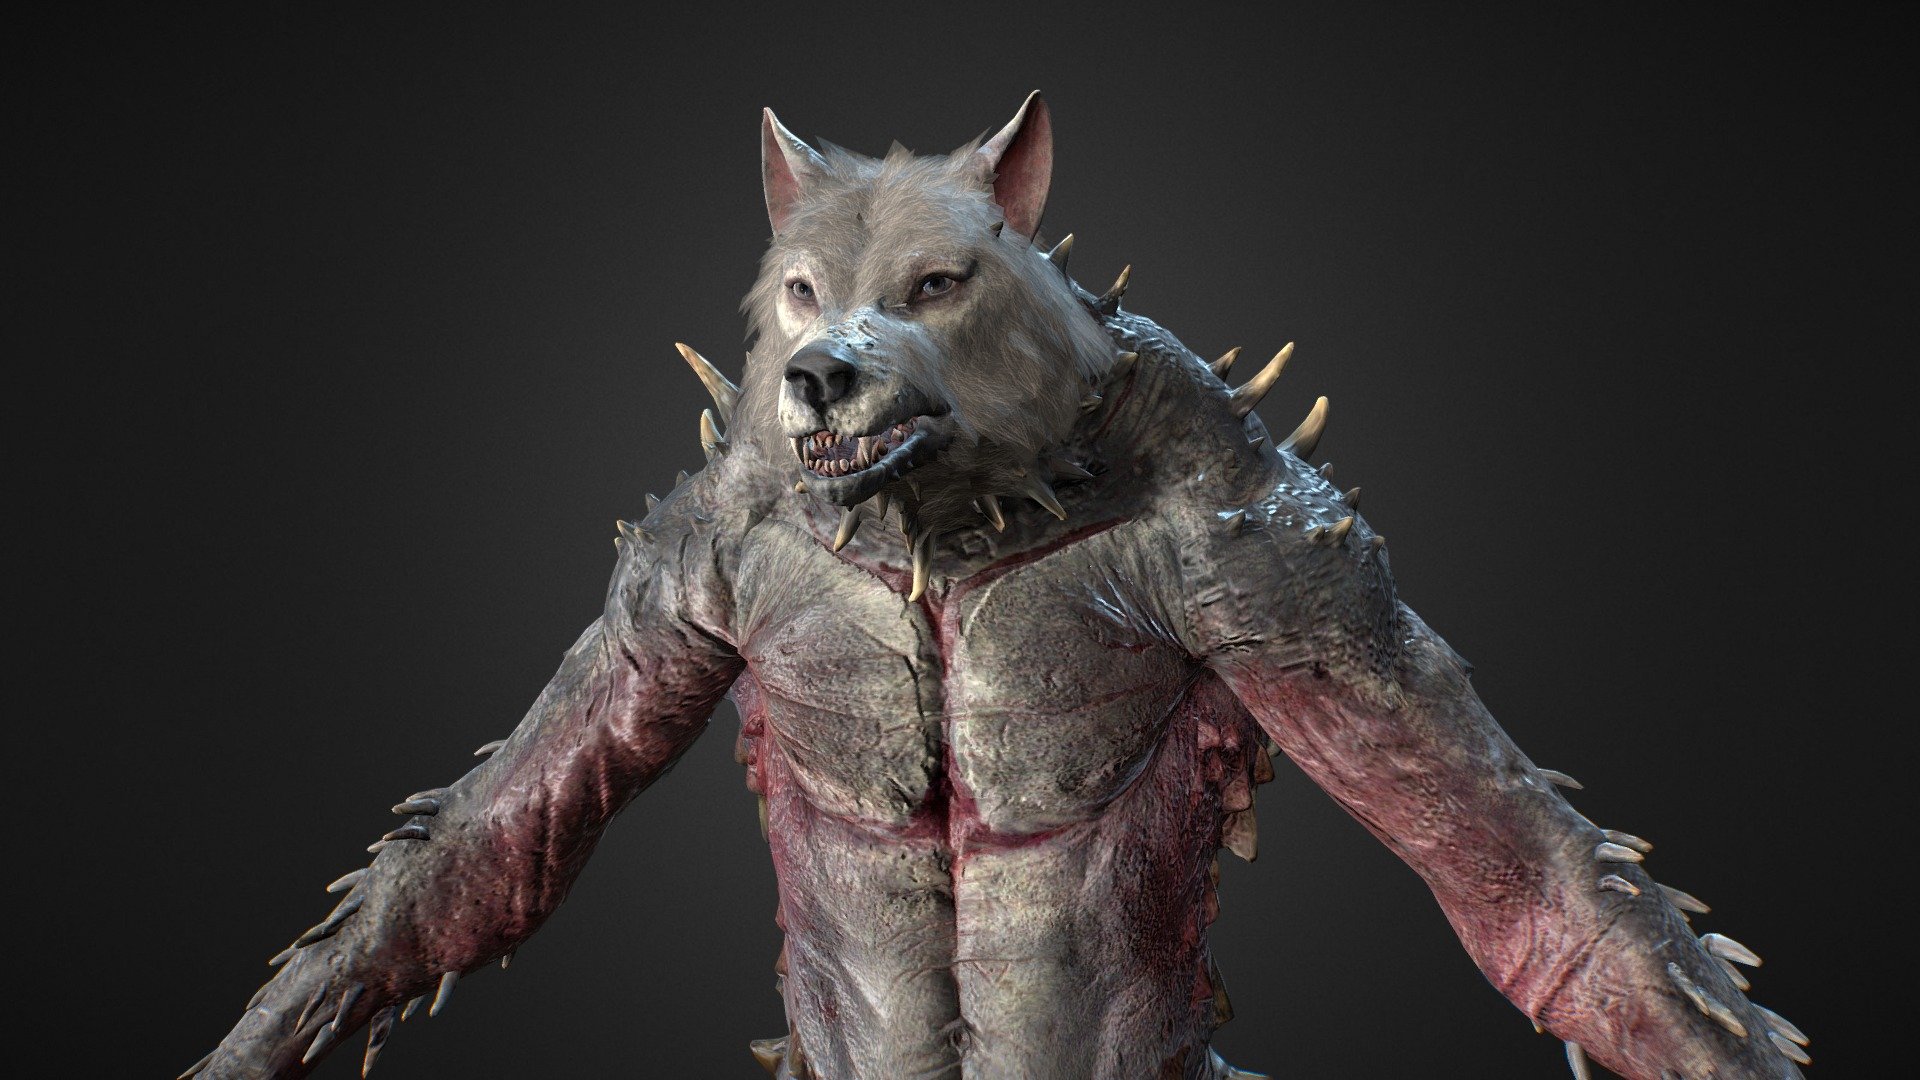 Unleash the power of the moon with our Realistic Werewolf 3D Model, available in FBX, C4D, OBJ, USDZ, and DAE formats. This game-ready model, complete with textures, is UV unwrapped and is ready for rigging and animation.


Formats Available:



FBX

C4D

OBJ

USDZ

DAE

Textures Included(png)

DM for extra skin textures.

Hope you love it,
Thank you 3d model